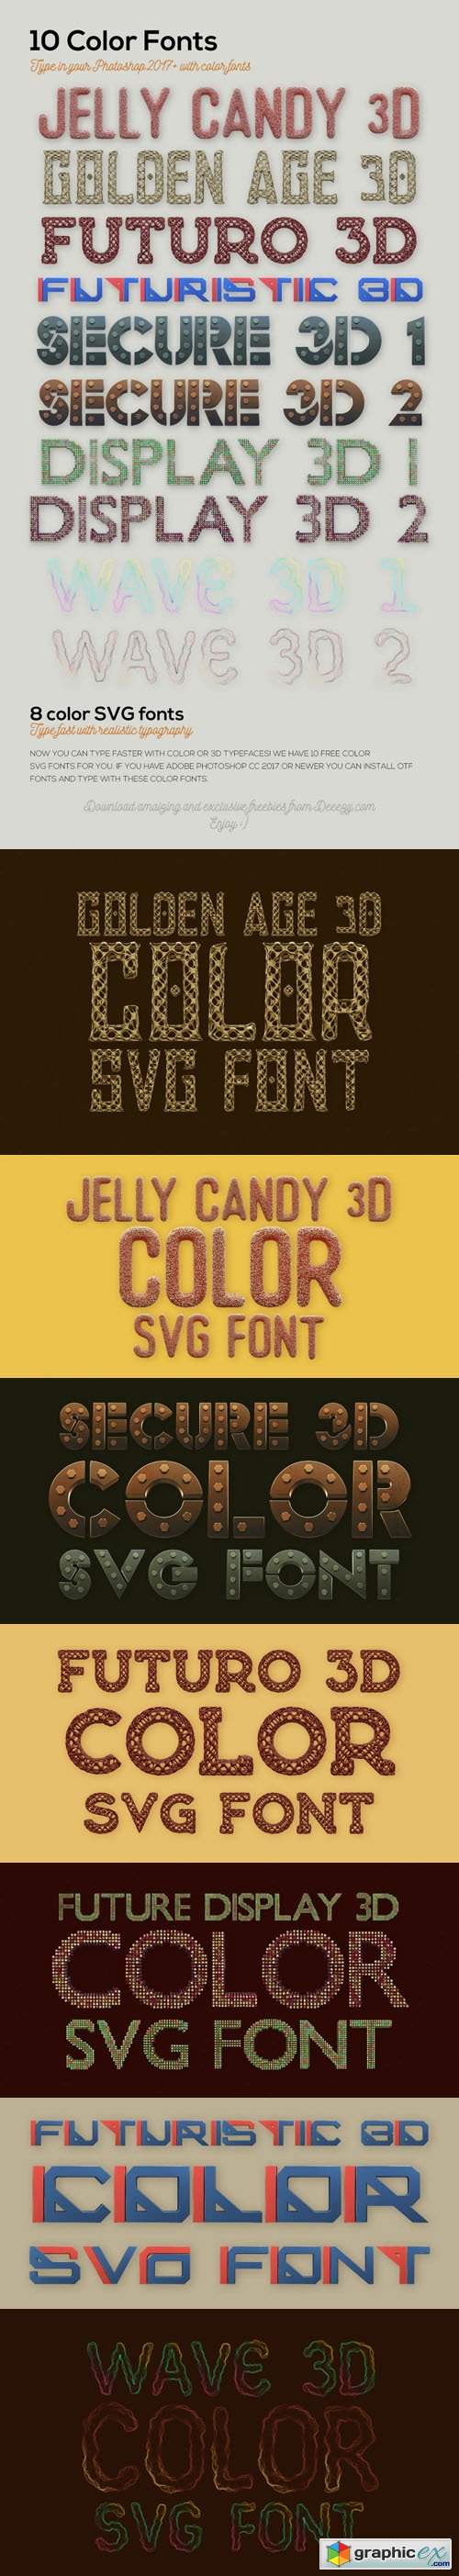 10 Color SVG Fonts for your Creative Projects